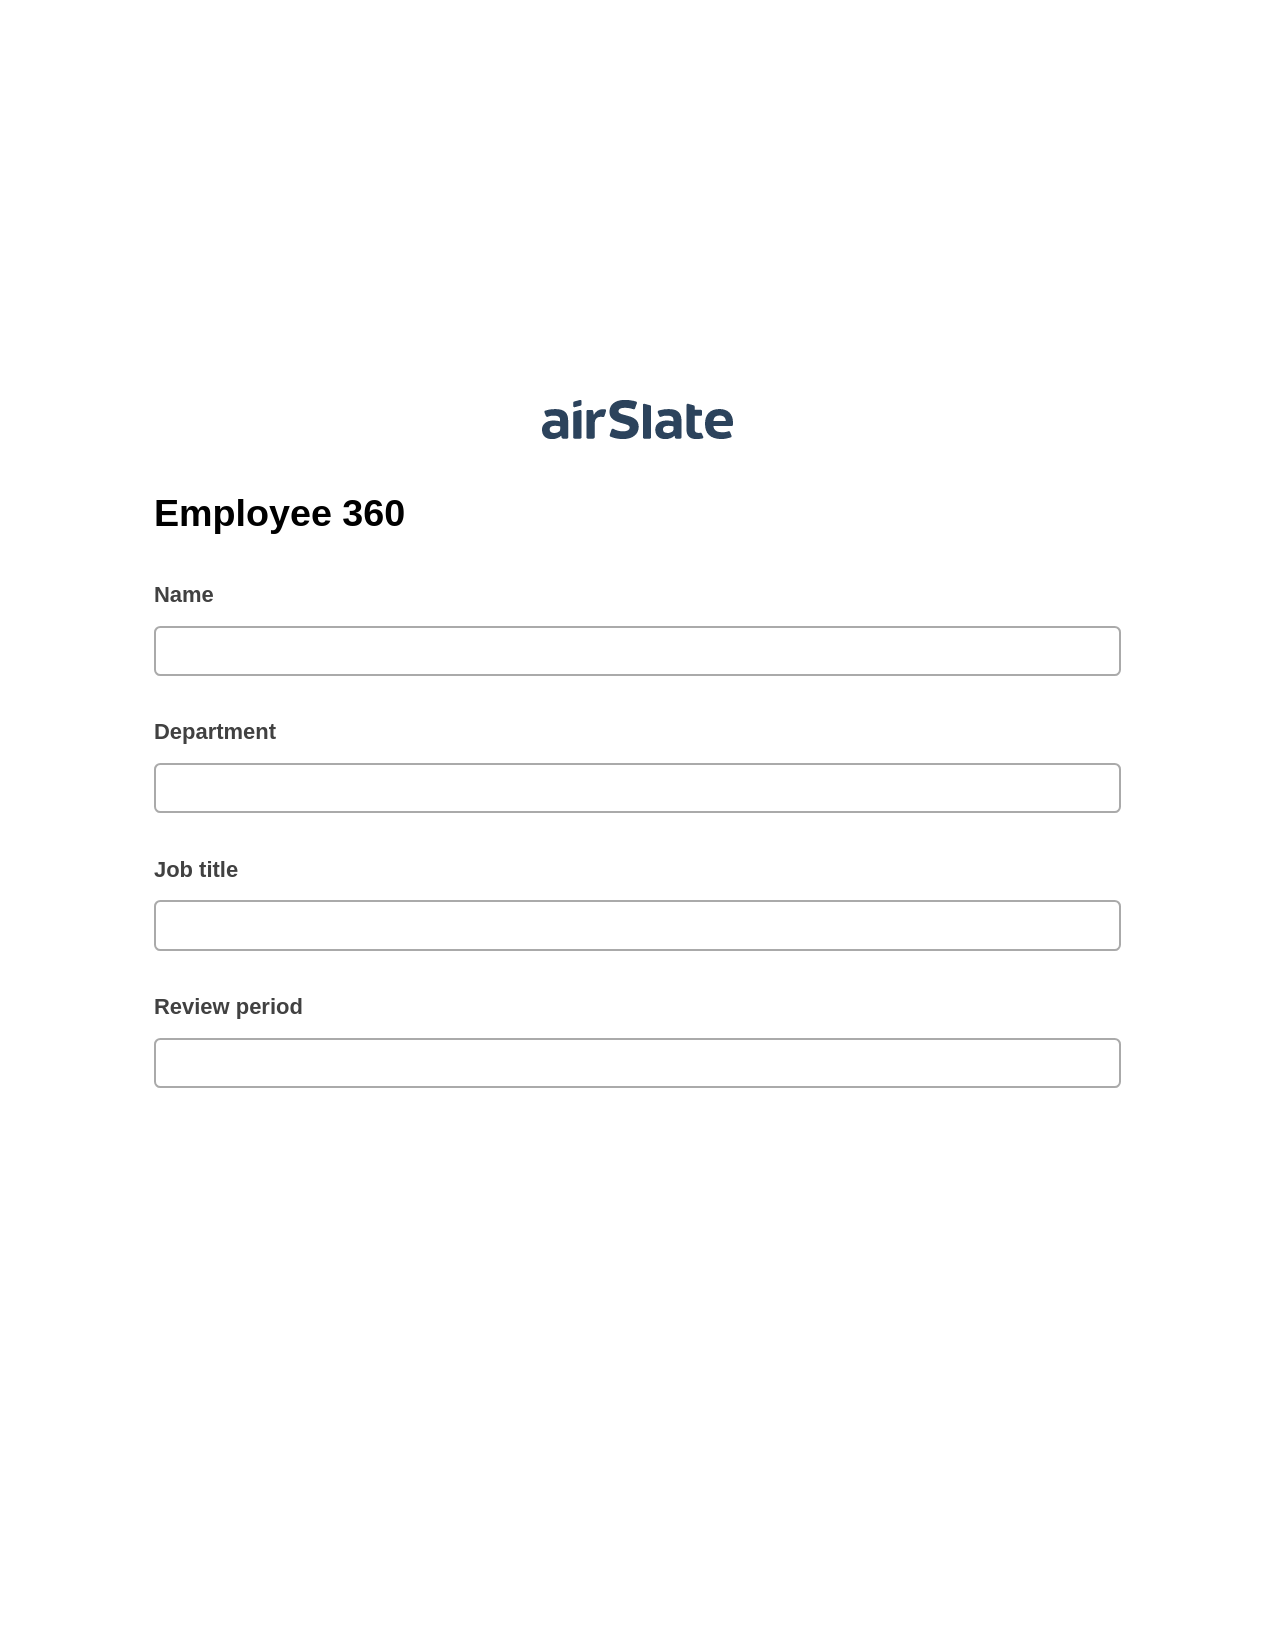 Employee 360 Pre-fill Dropdowns from CSV file Bot, Unassign Role Bot, Export to Excel 365 Bot